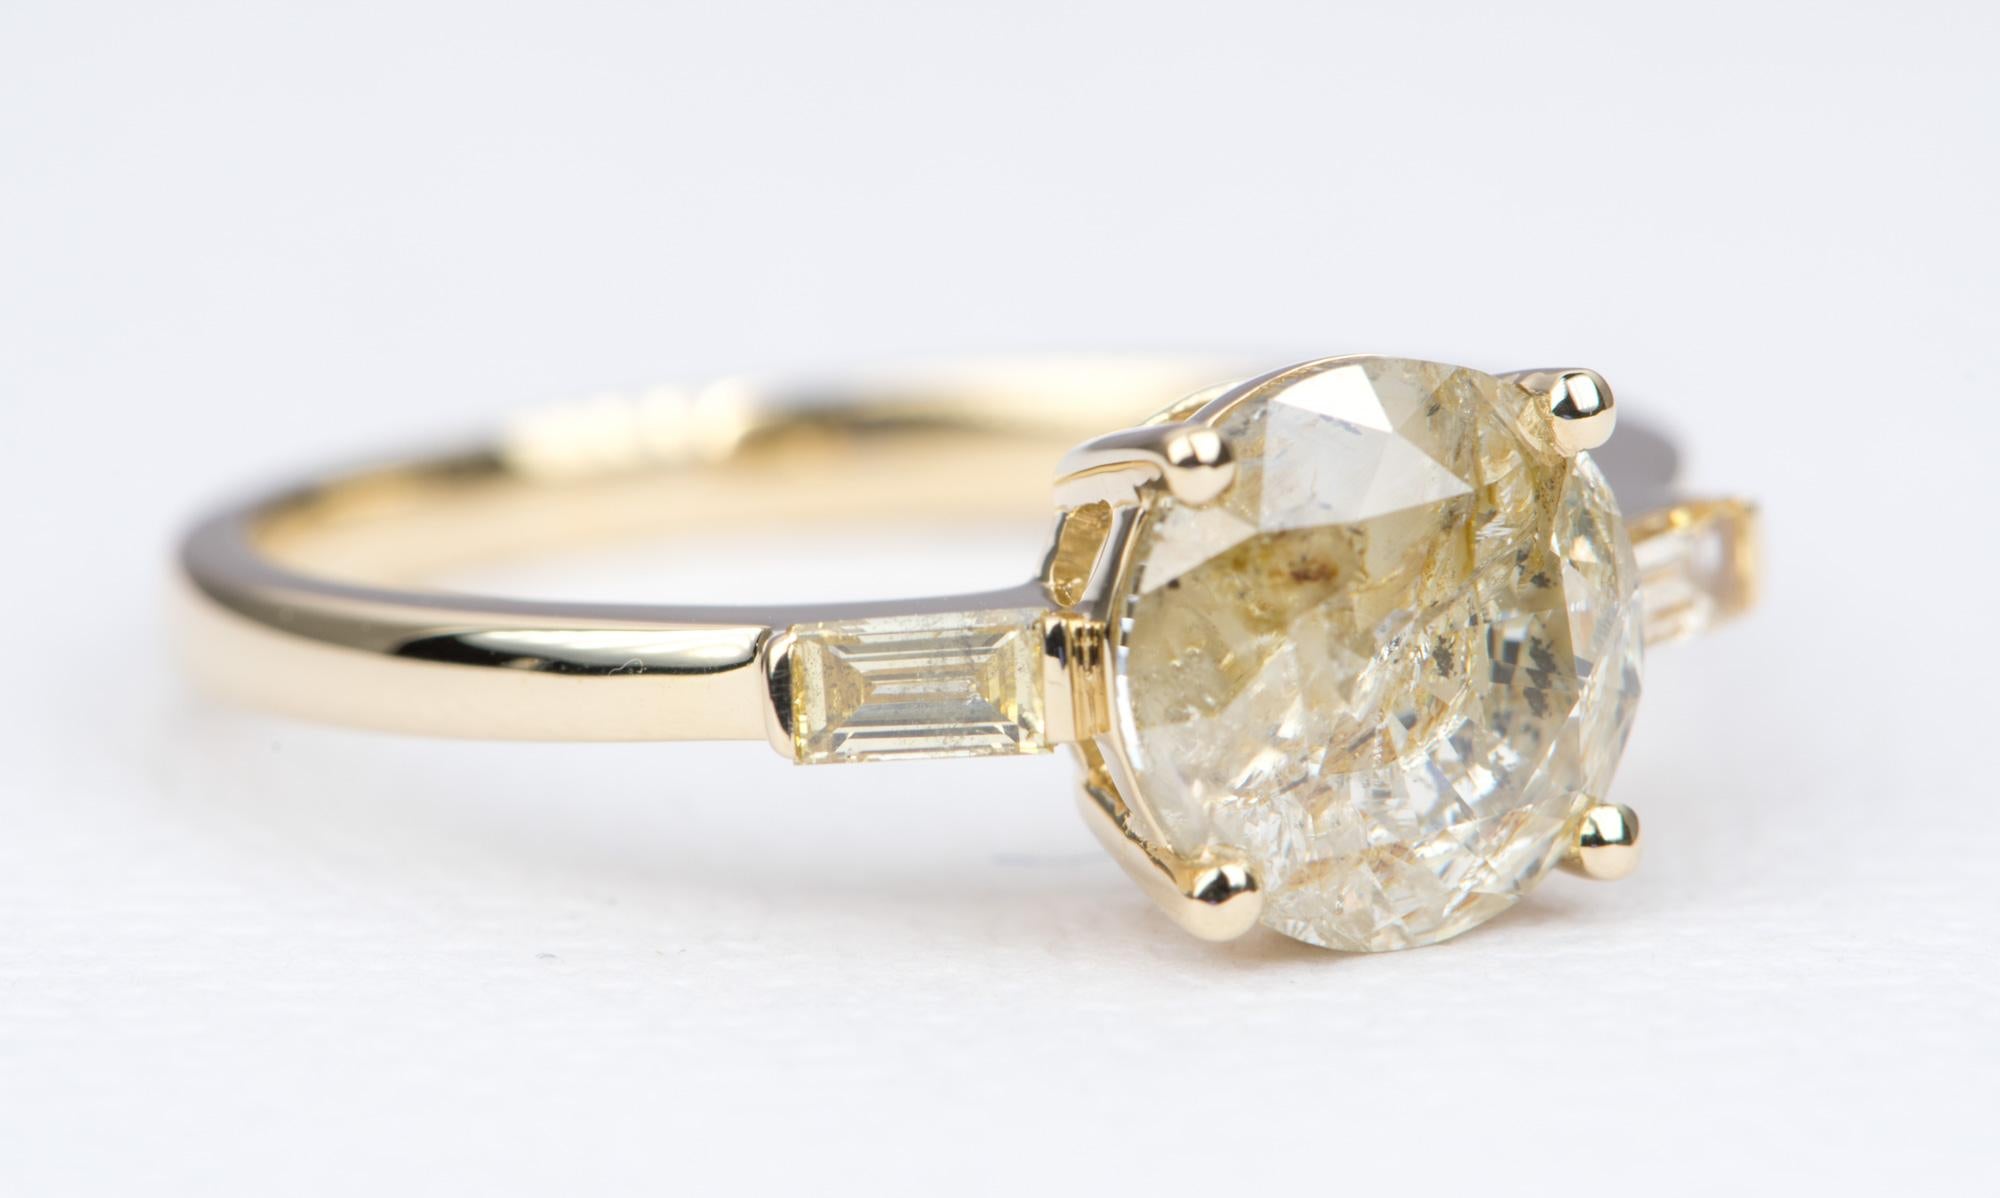 ♥  Solid 14K yellow gold ring set with a round brilliant cut champagne-colored diamond, flanked with baguette diamonds on the sides to complement the center stone
♥  The overall setting measures 15mm in width, 7.7mm in length, and sits 5.5mm tall